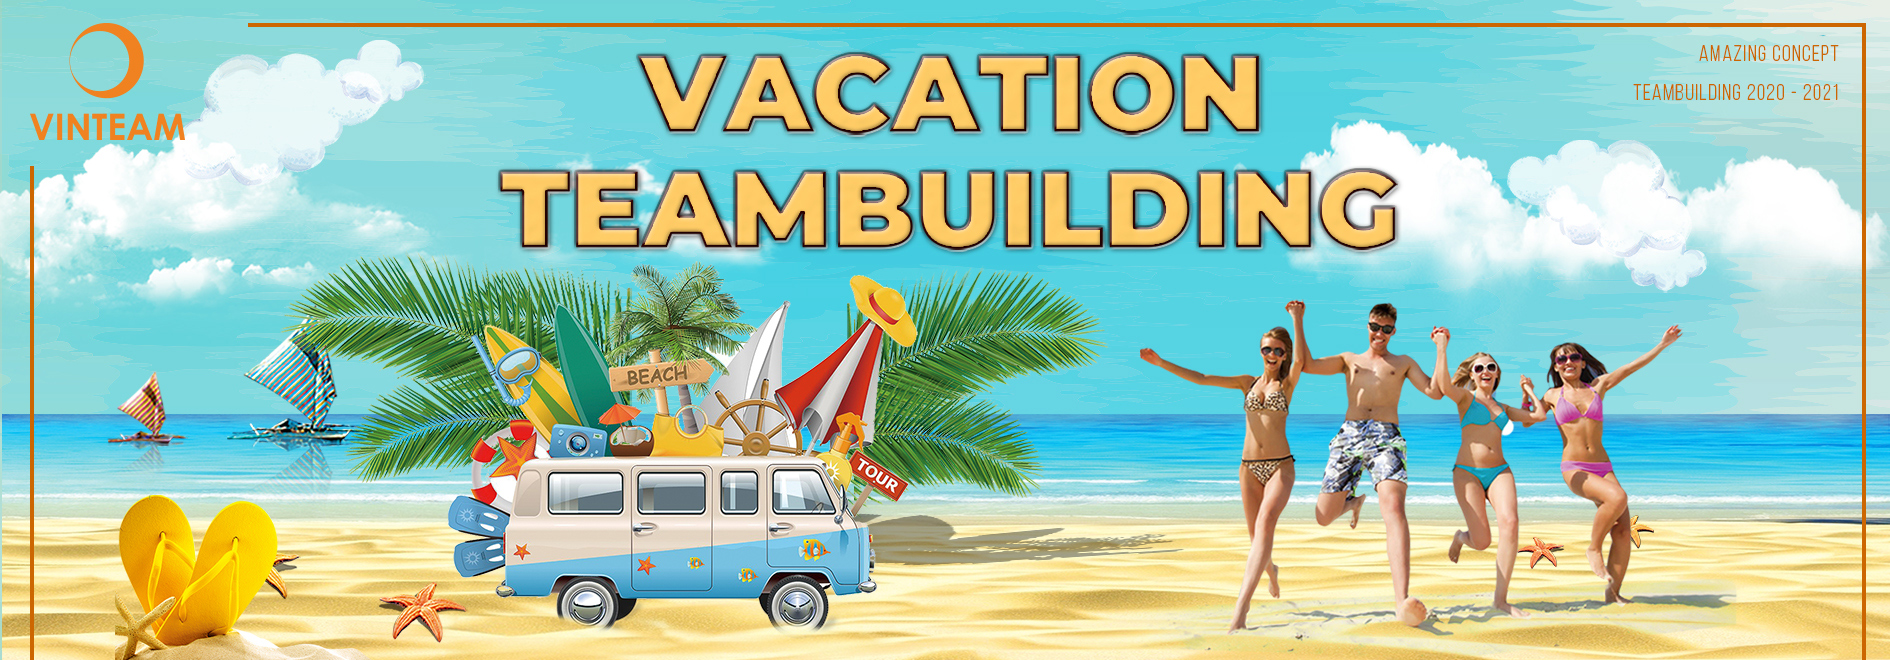 11.-COVER-VACATION-TEAMBUILDING